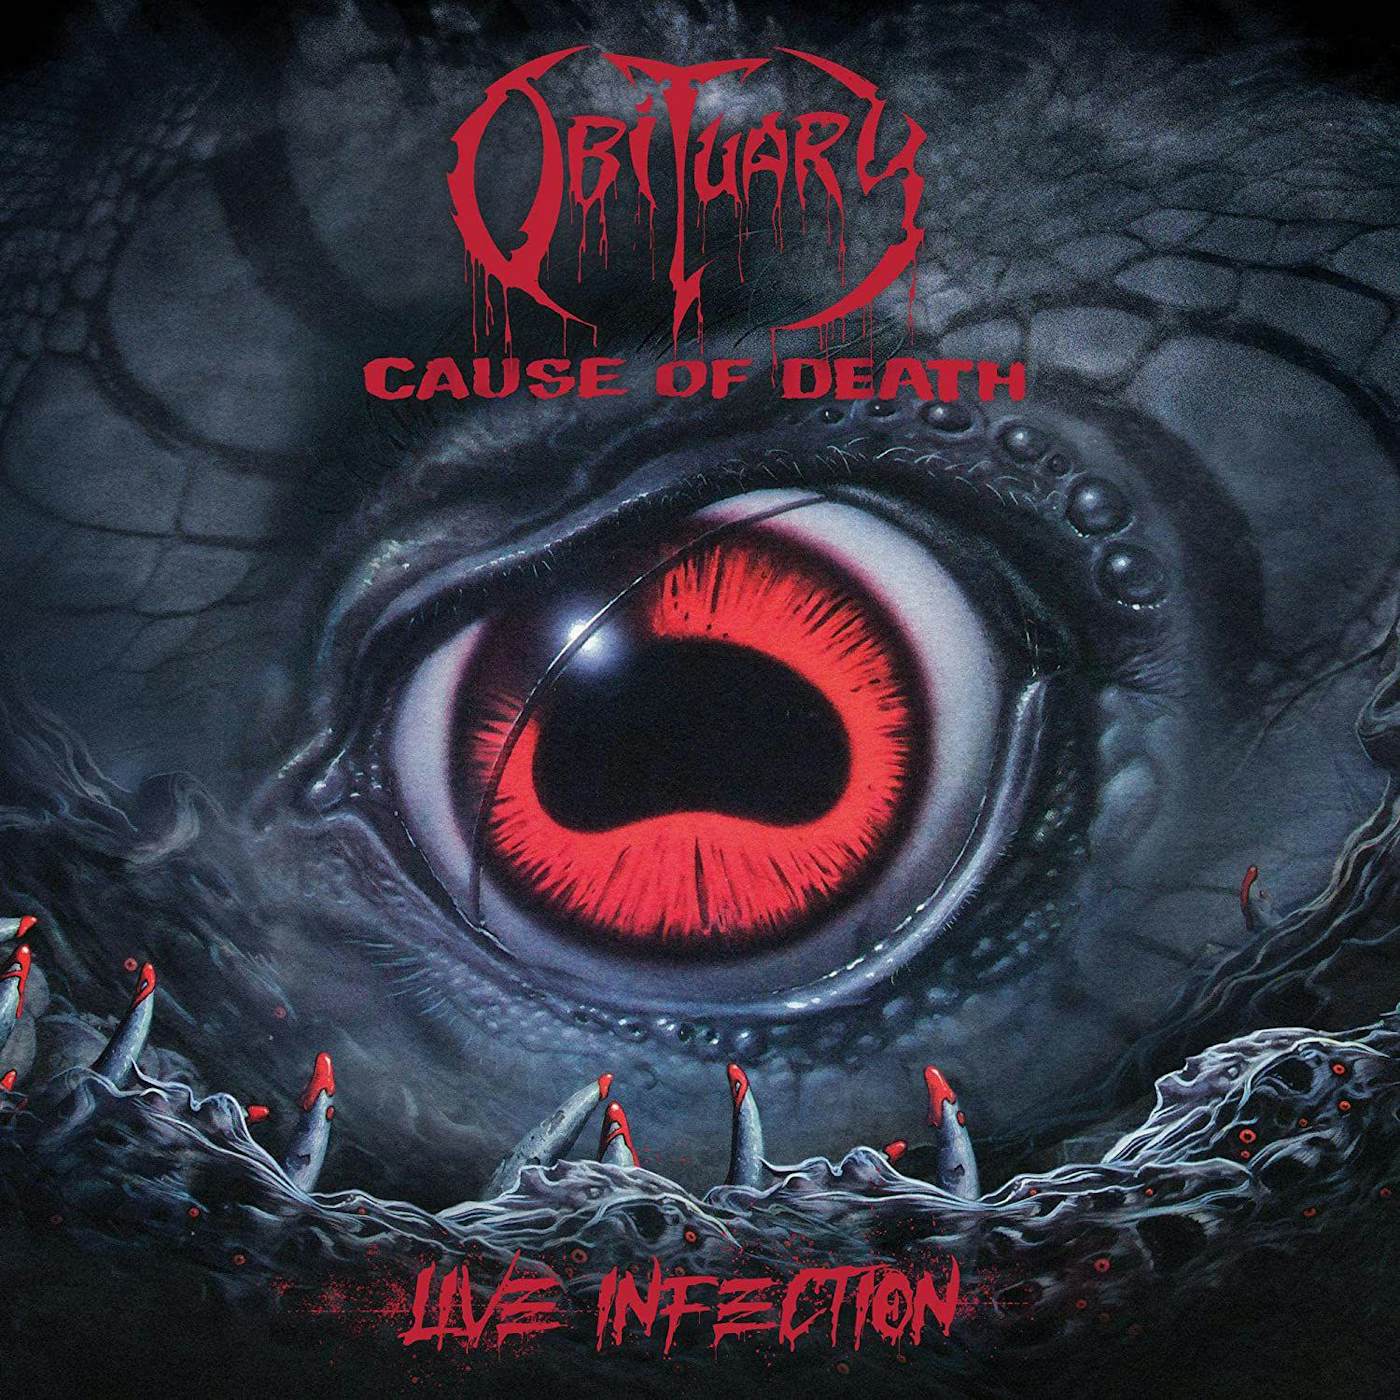 Obituary Cause of Death - Live Infection Vinyl Record